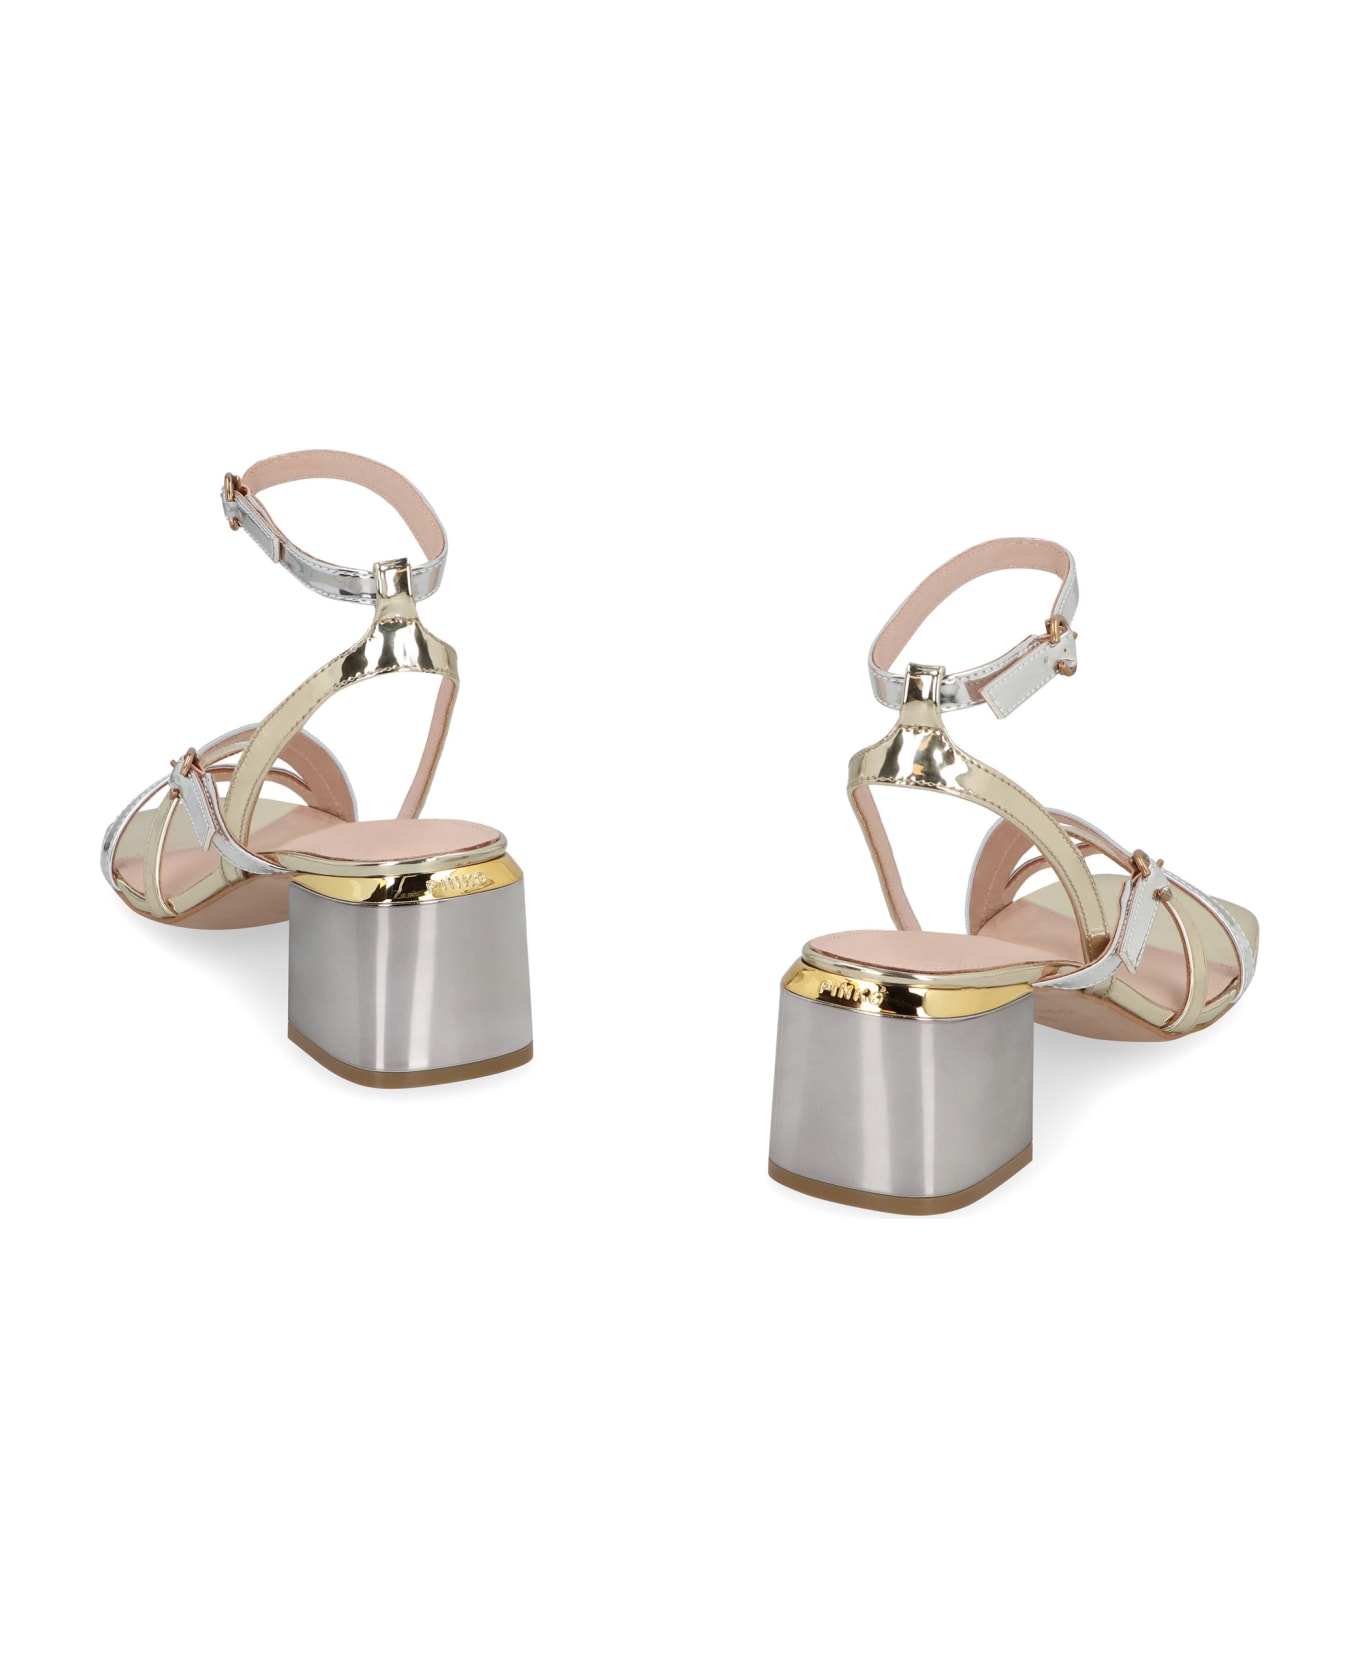 Pinko Patent Leather Sandals - silver サンダル